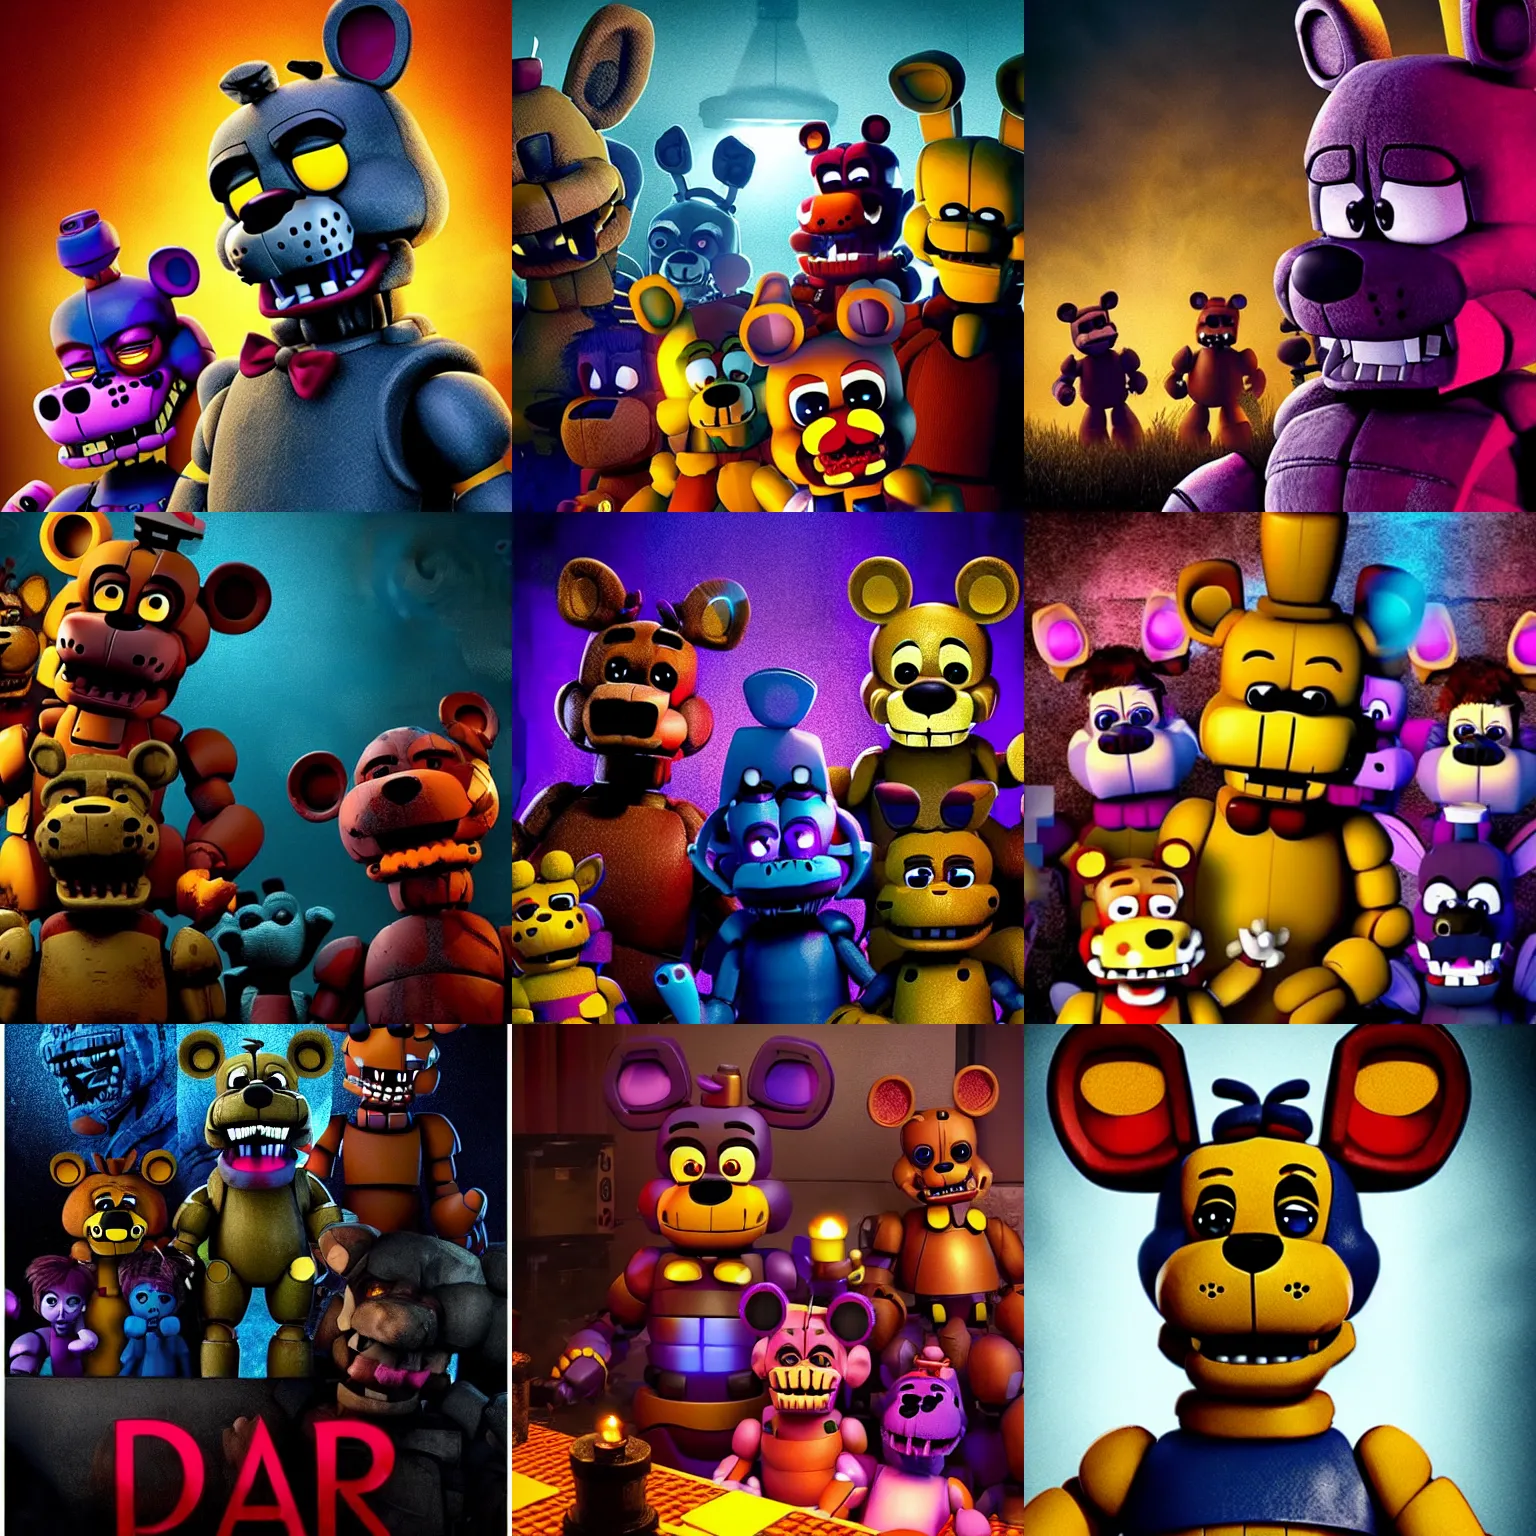 Five Nights At Freddy's movie poster, Stable Diffusion